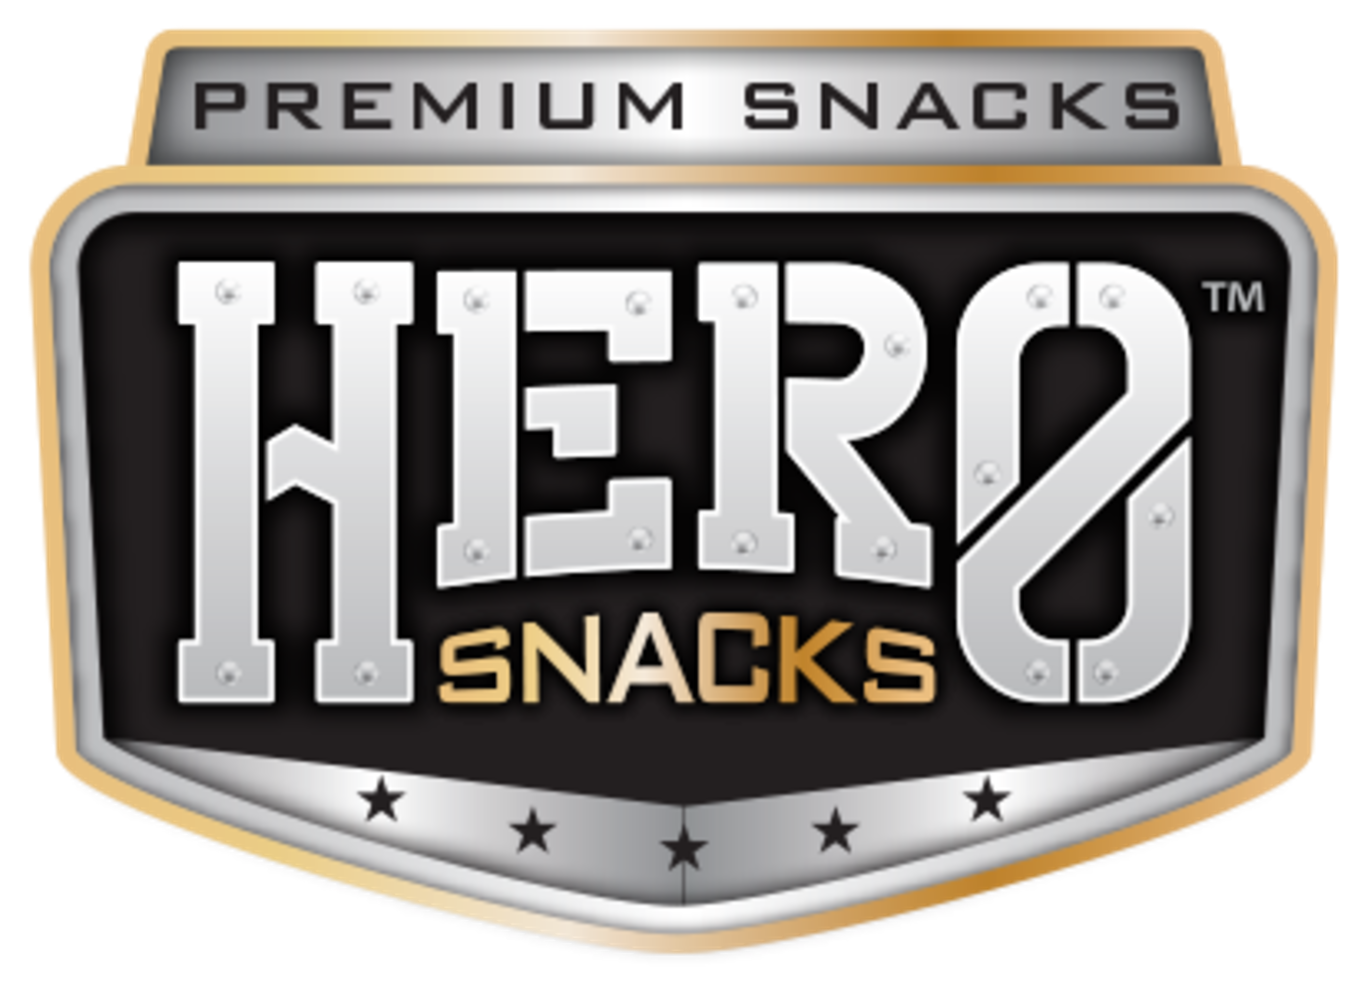 Hero Snacks Auction - Late Model Protein Portioning, Slicing and Pouch Packaging - Ishida, Weighpack, Vemag, Ross, Handtmann, Weiler, Wolf Tec